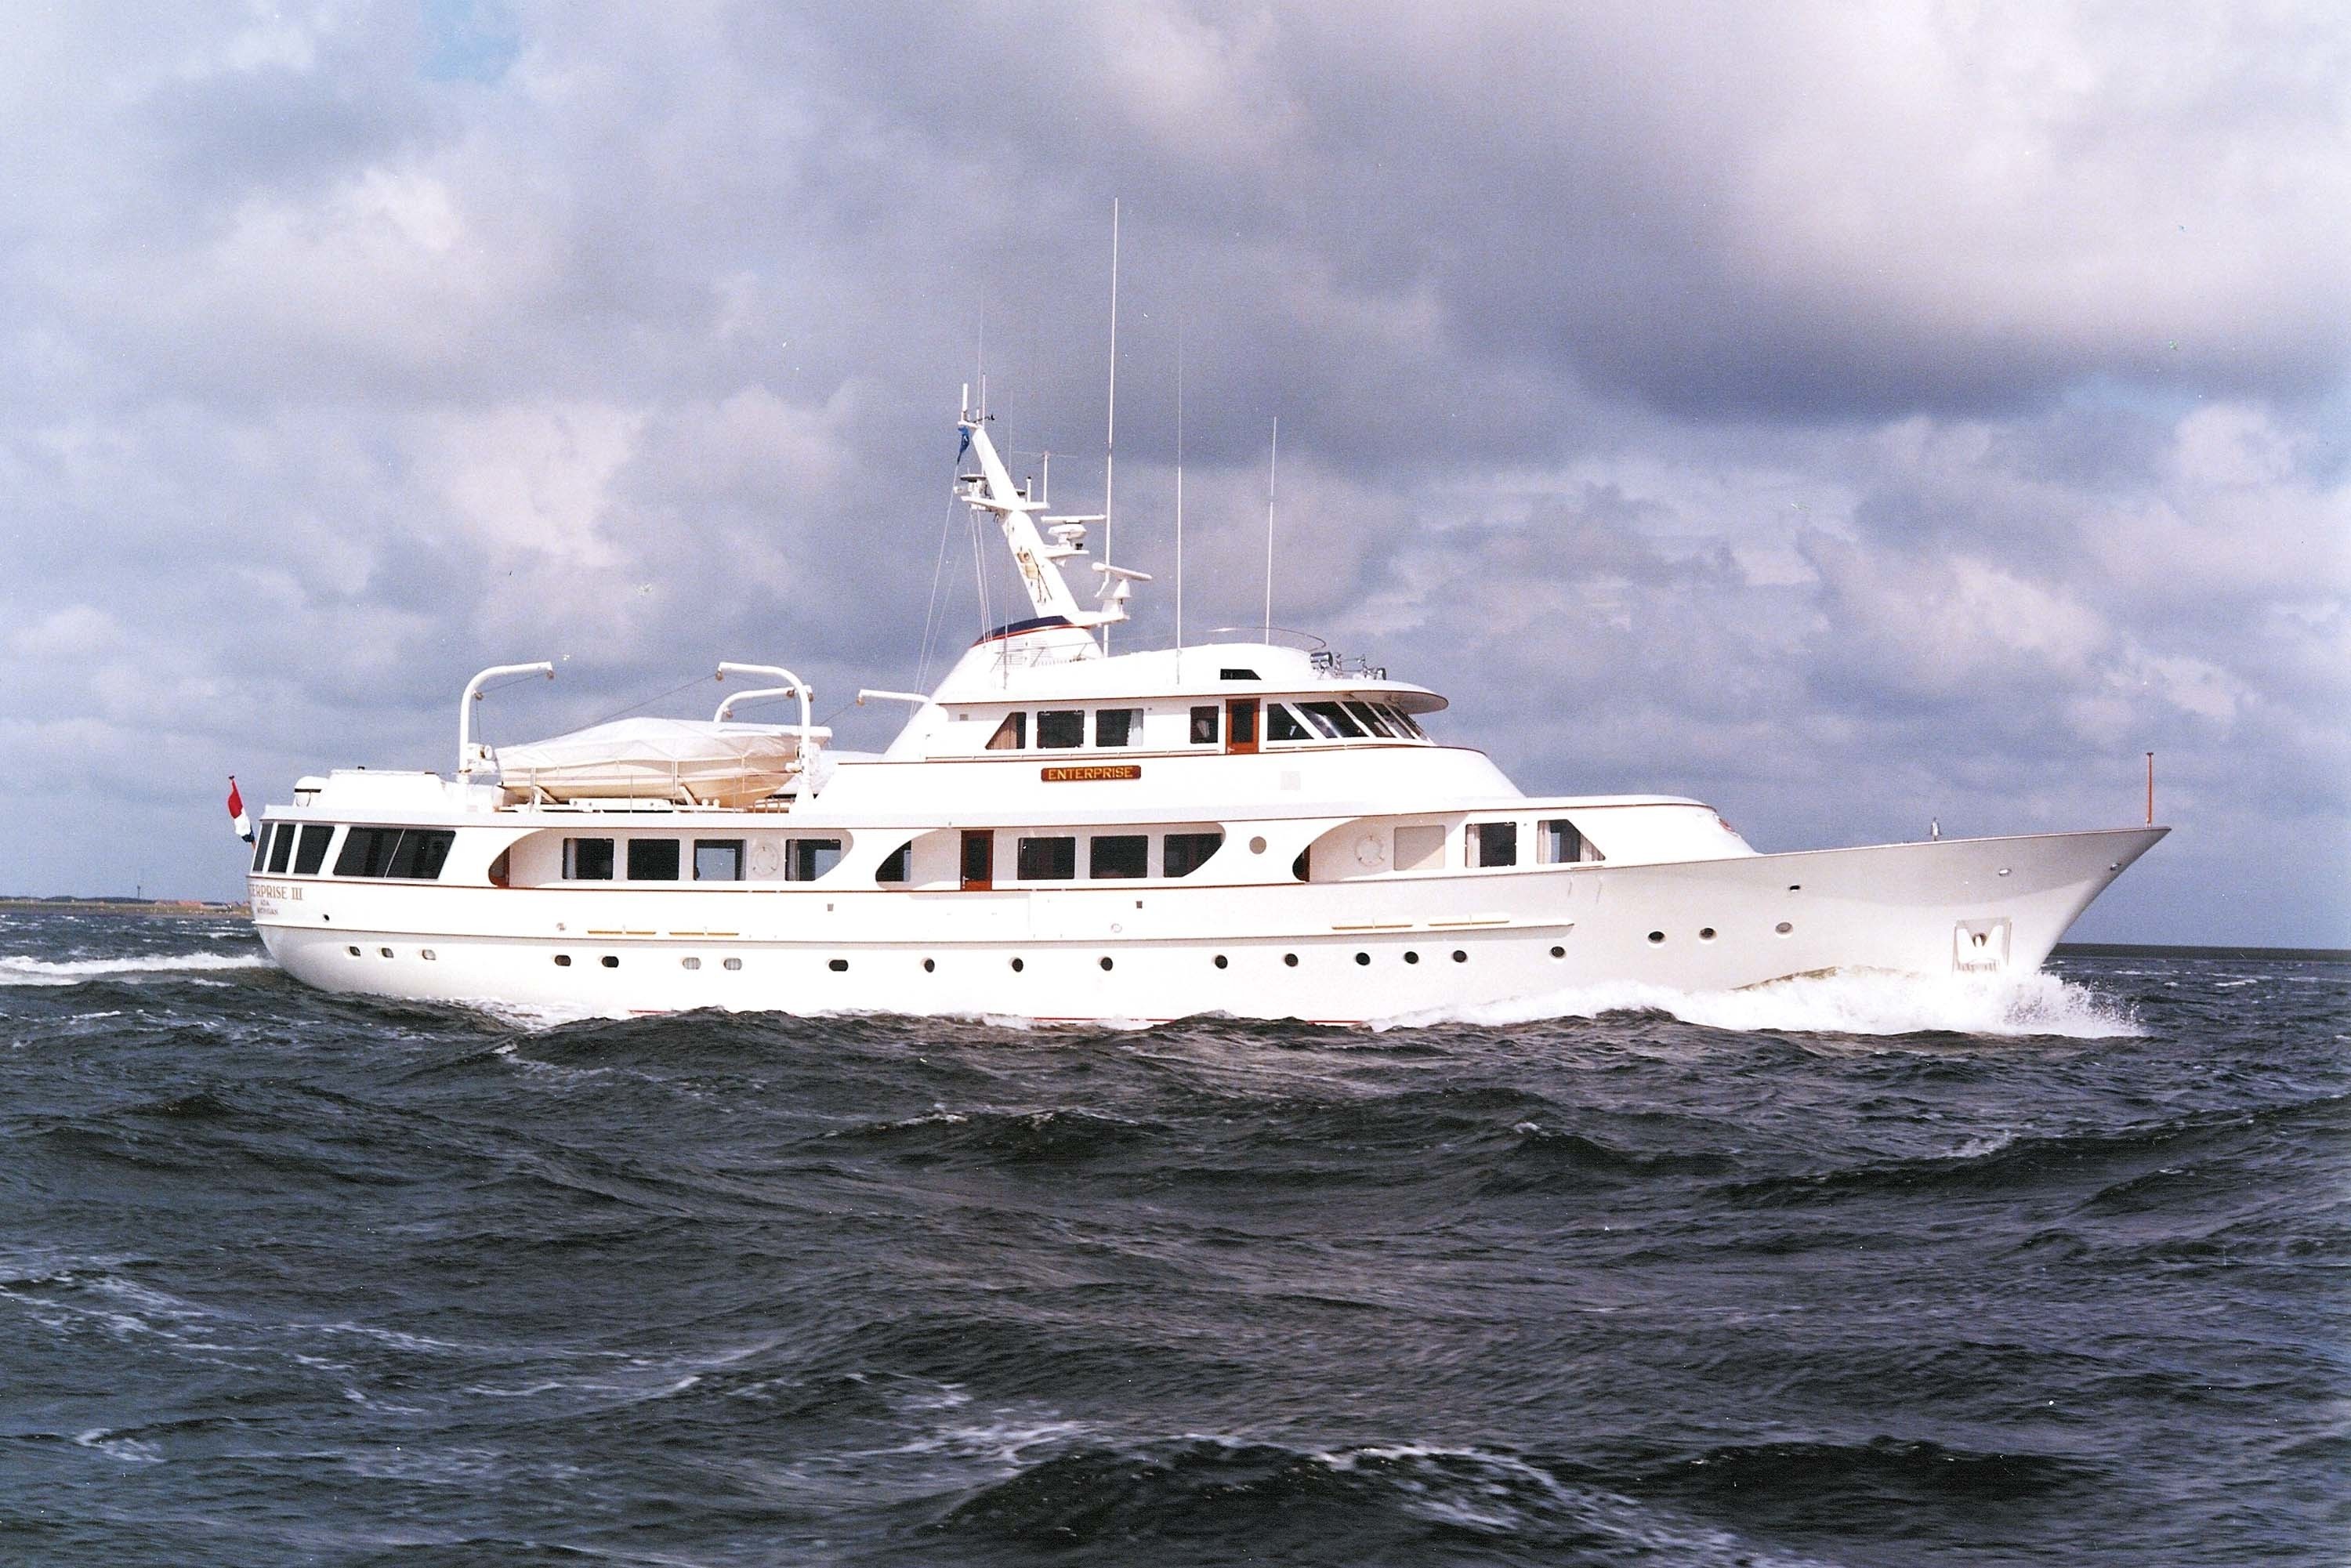 Classic Feadship motor yacht Seagull of Cayman sold  Yacht for sale,  Expedition yachts, Feadship yachts